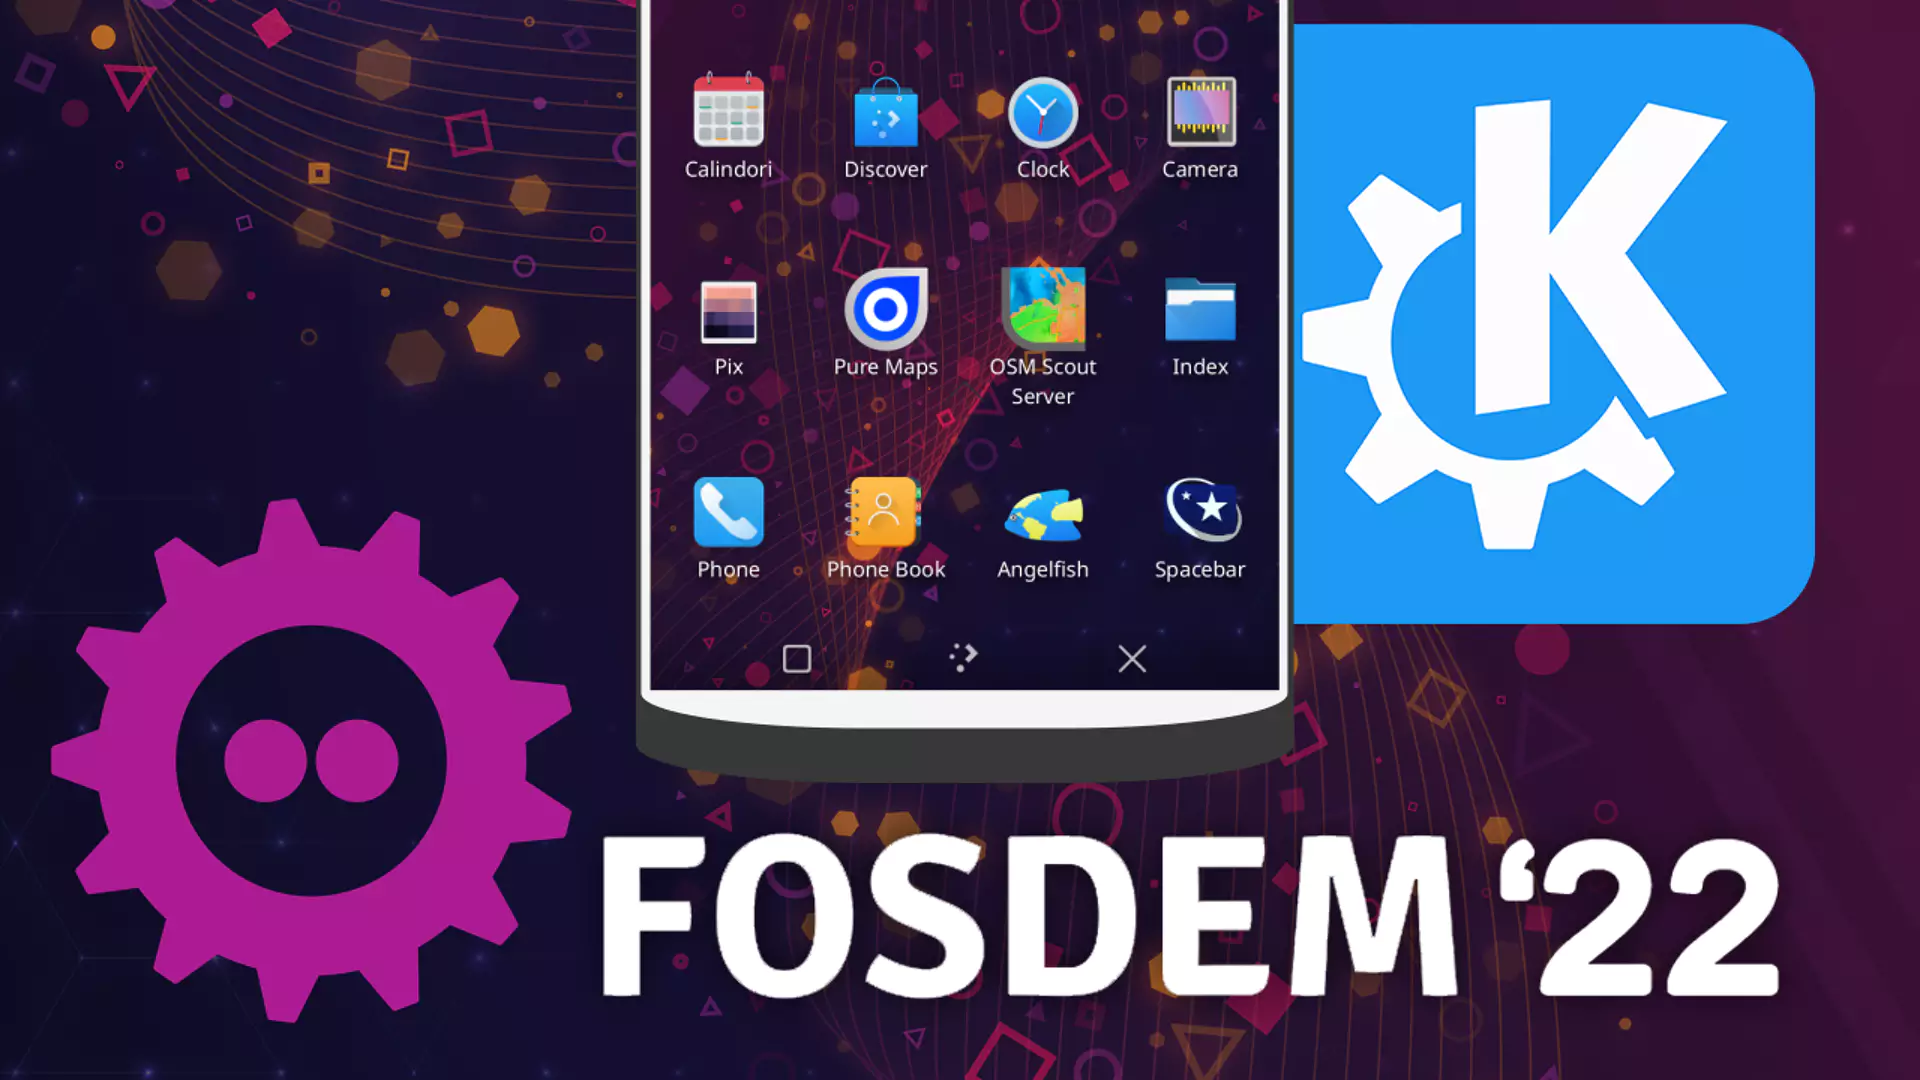 FOSDEM snd KDE logos with picture of Plasma Mobile.